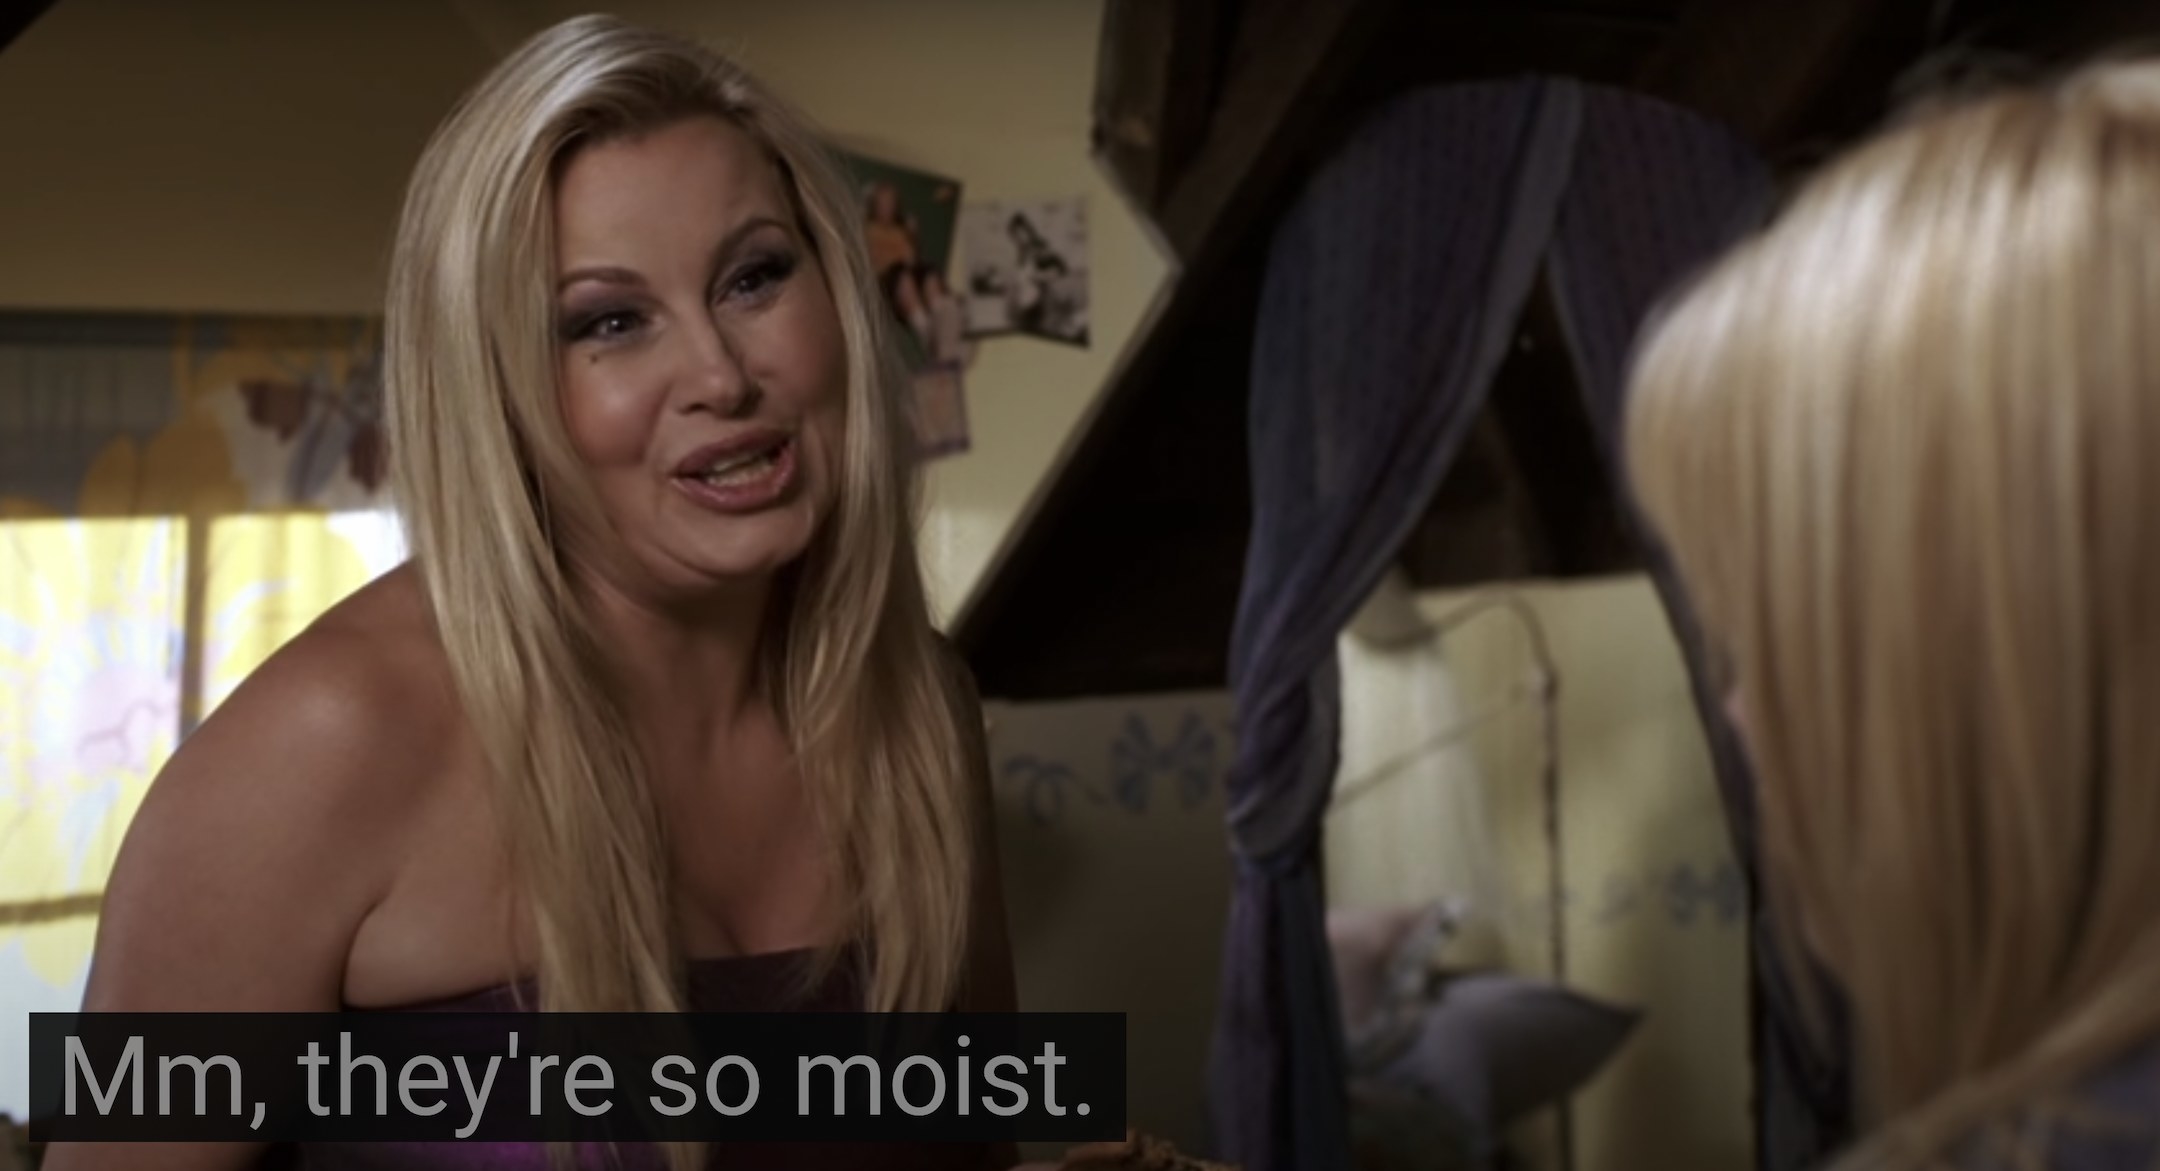 Fiona says, Mm, theyre so moist